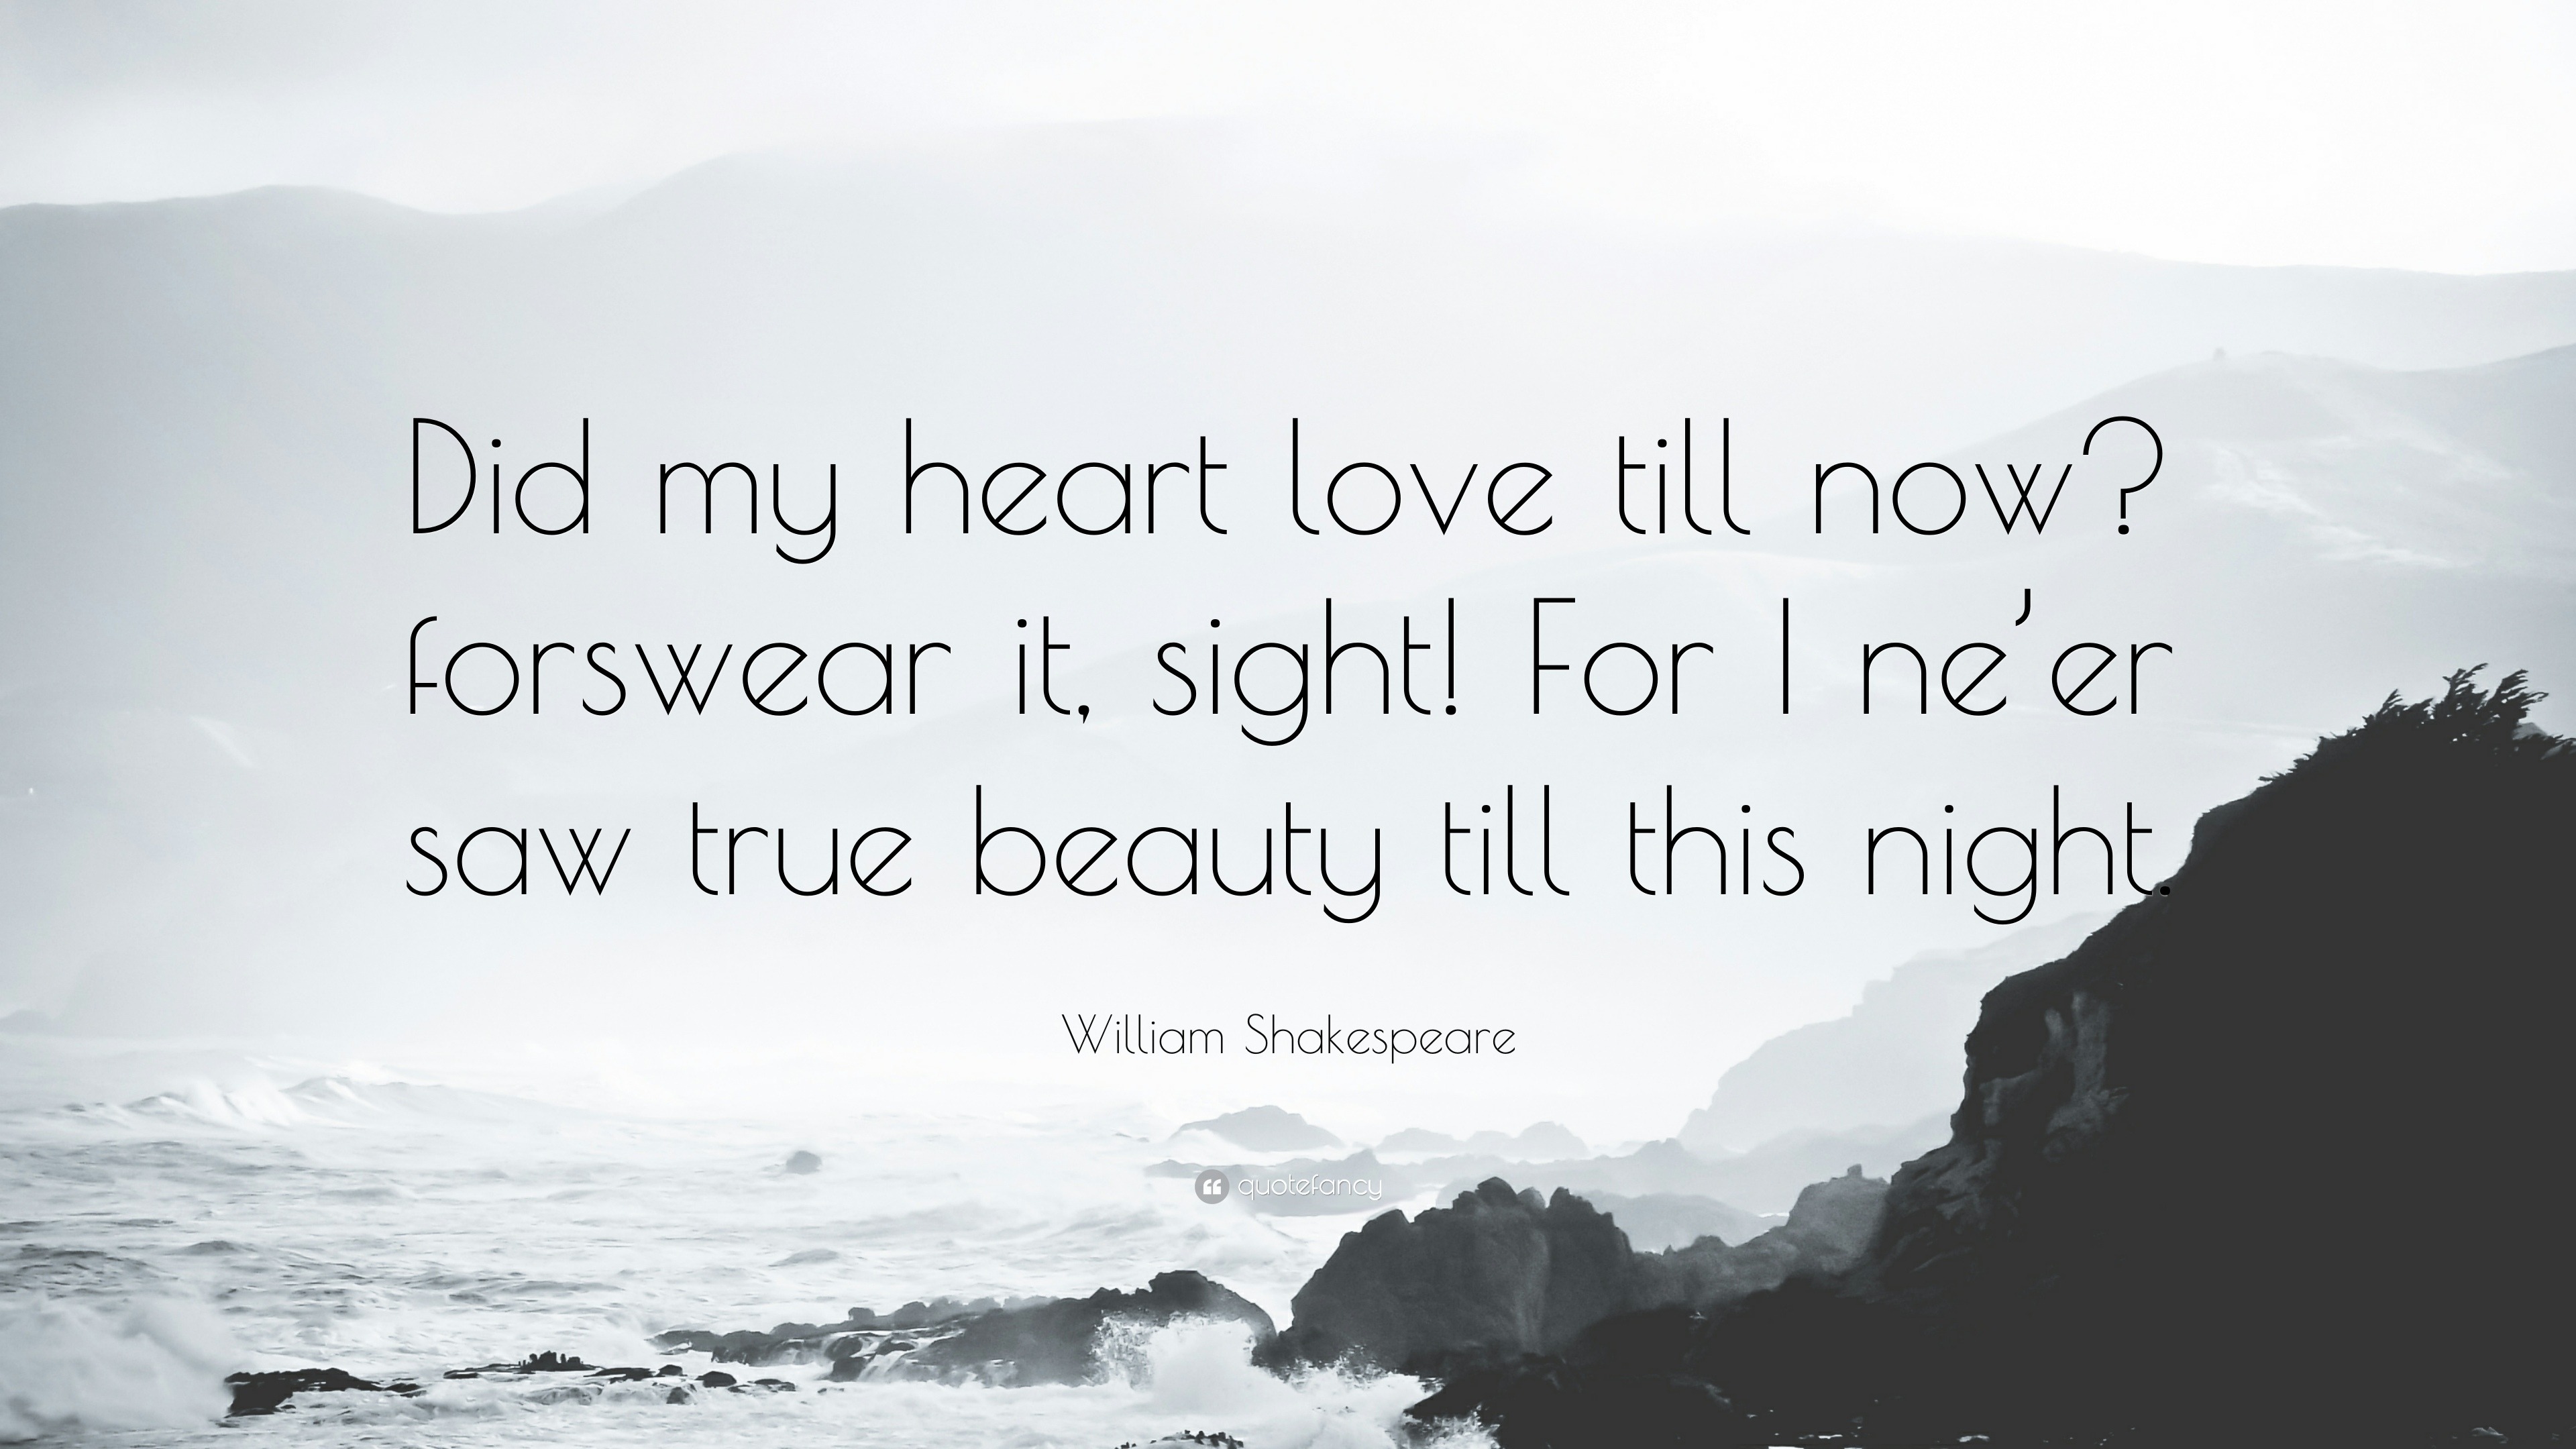 William Shakespeare Quote “Did my heart love till now forswear it sight